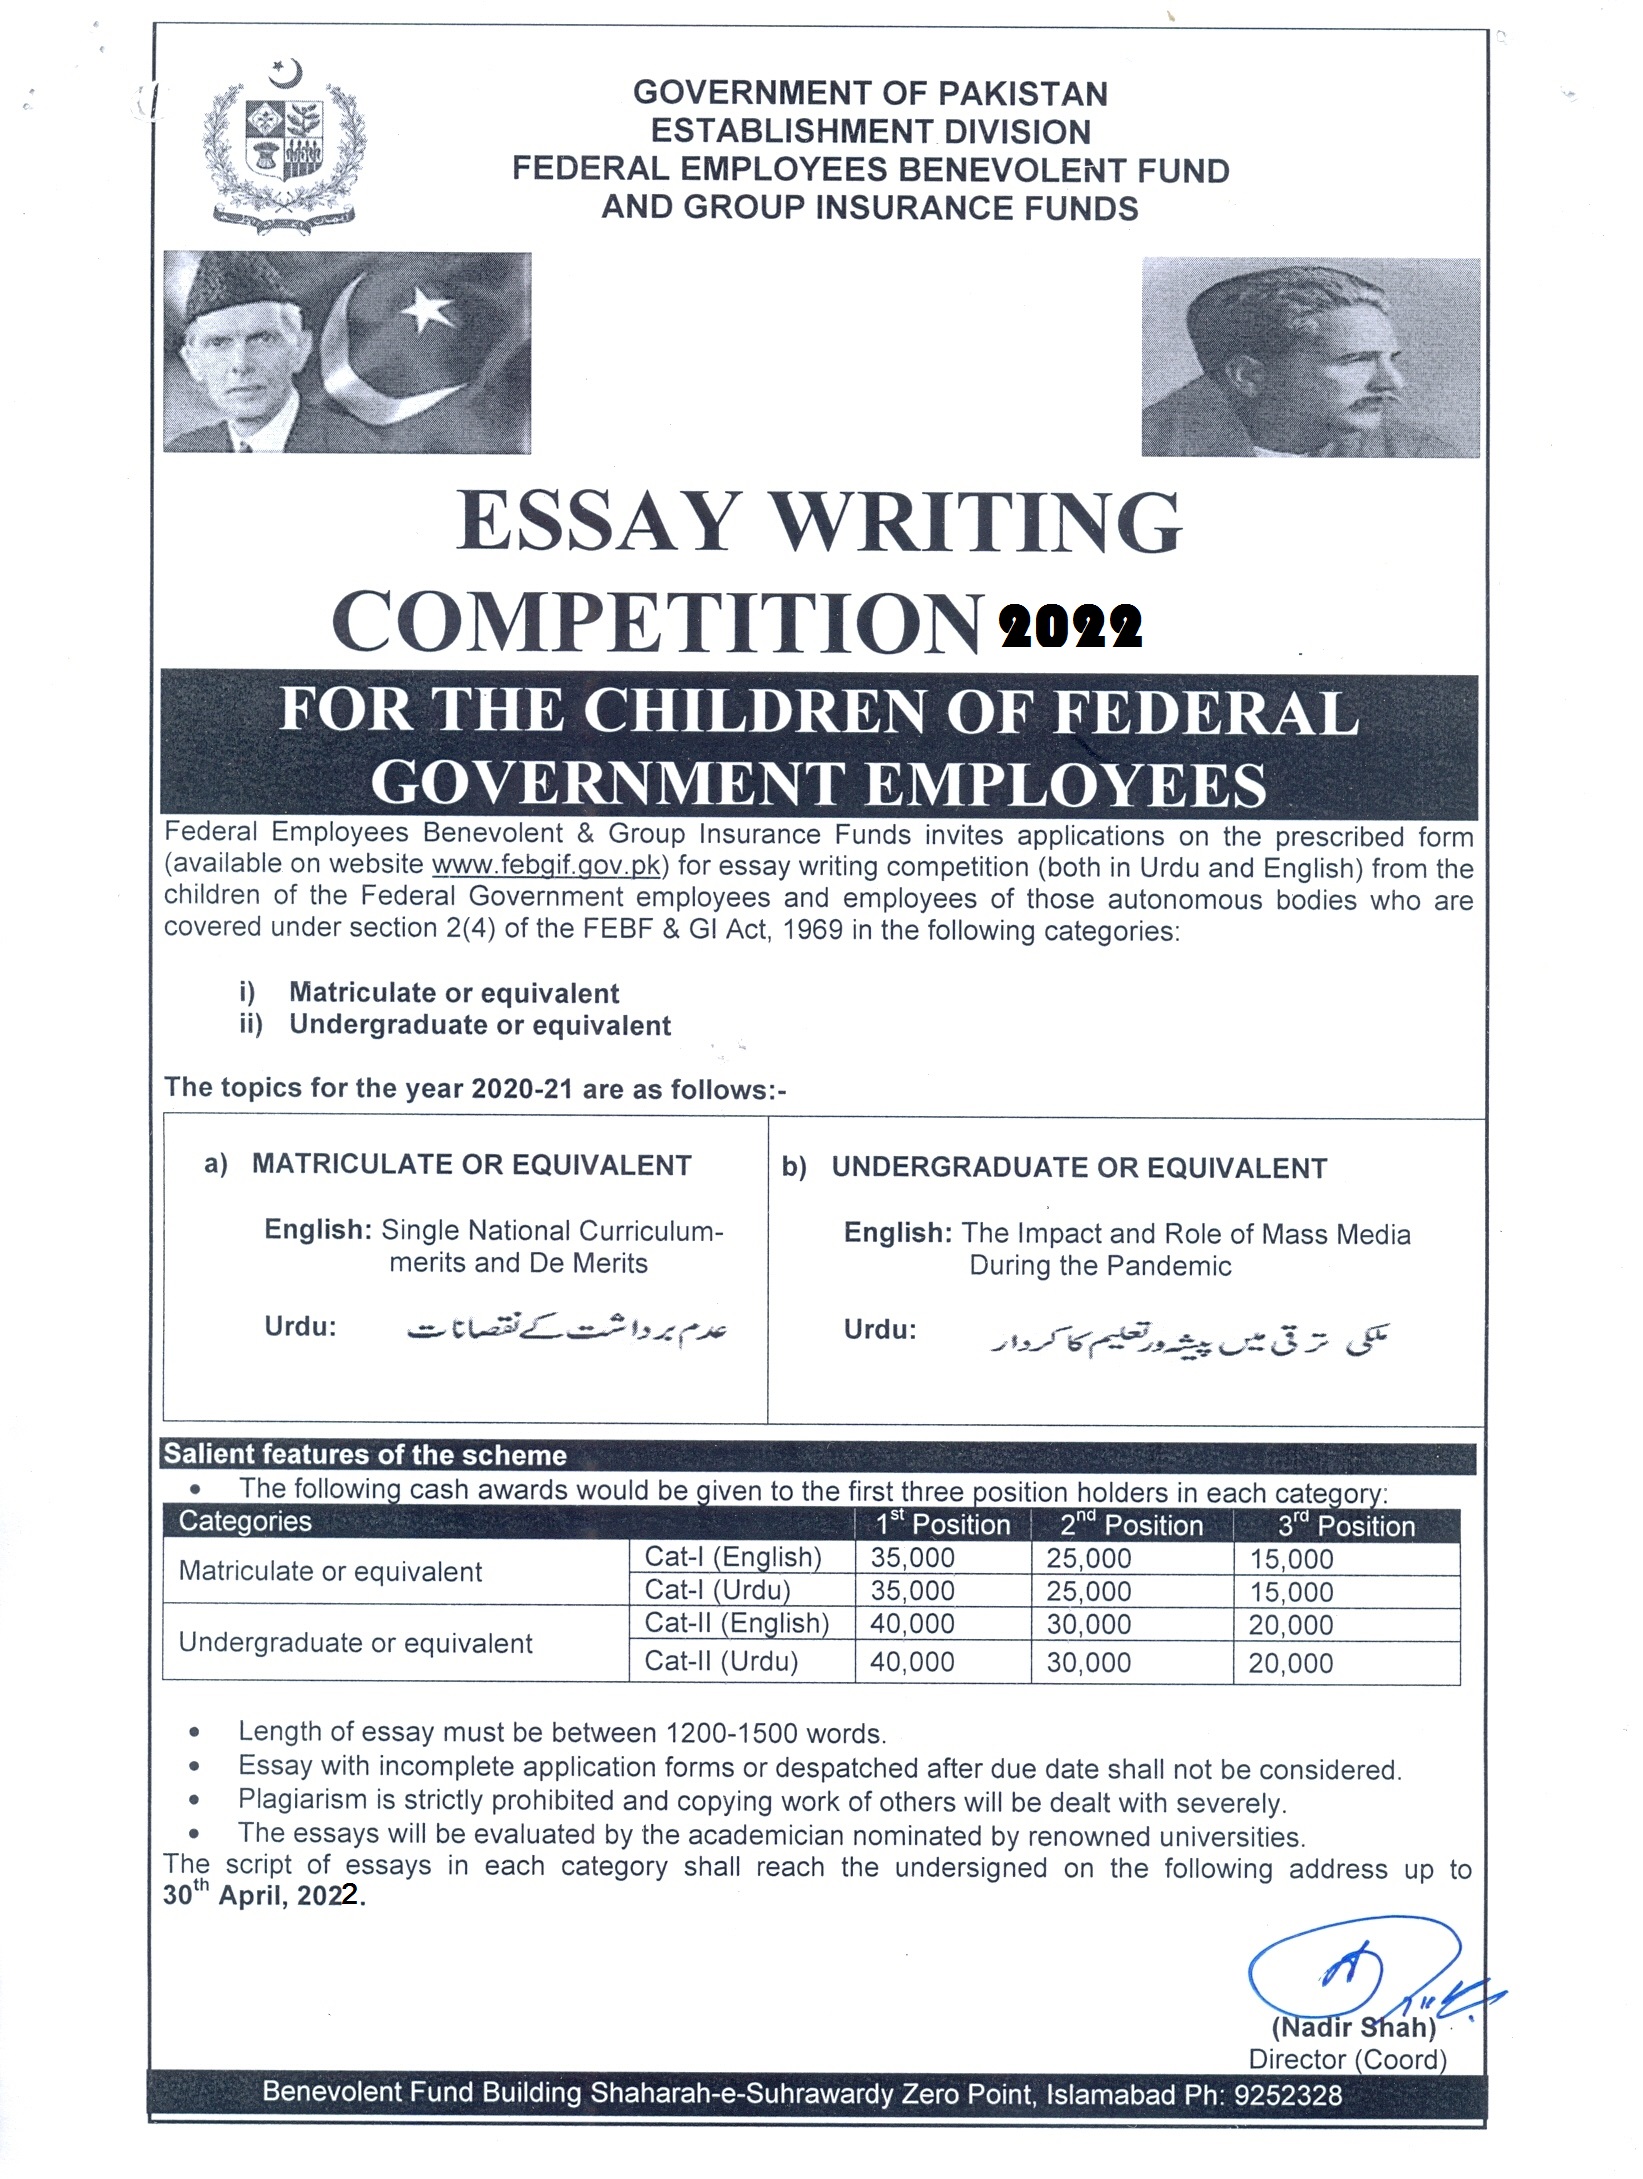 FEBF Essay Writing Competition in Pakistan